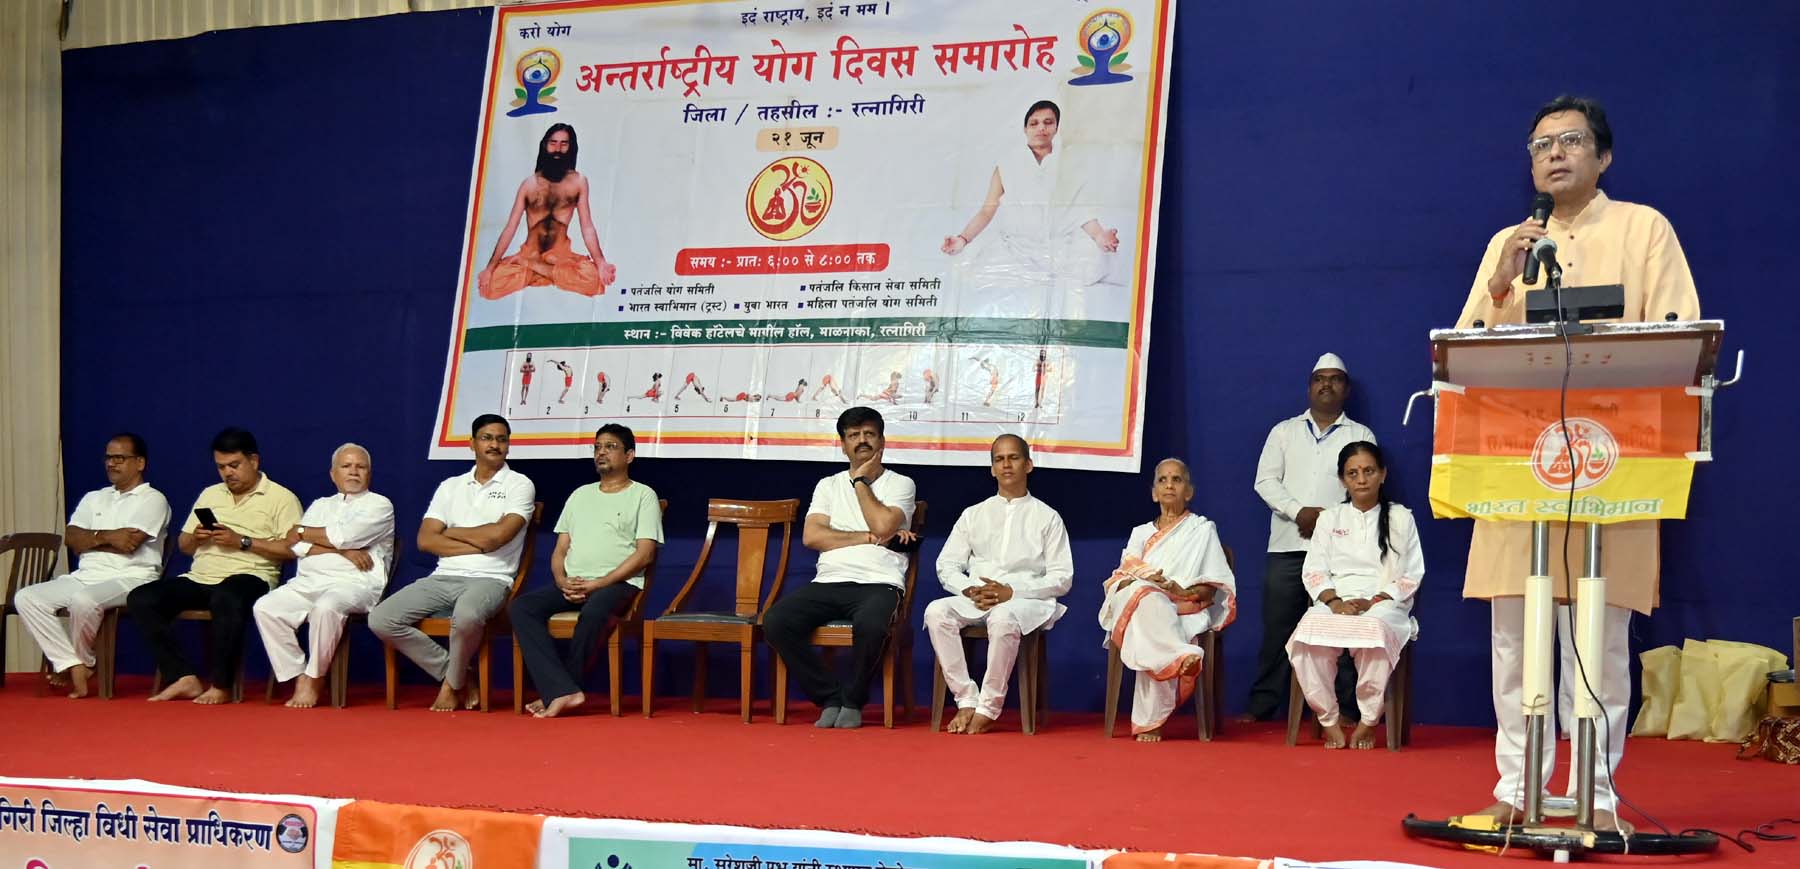 Celebrating Yoga Day by Patanjali Yoga Committee